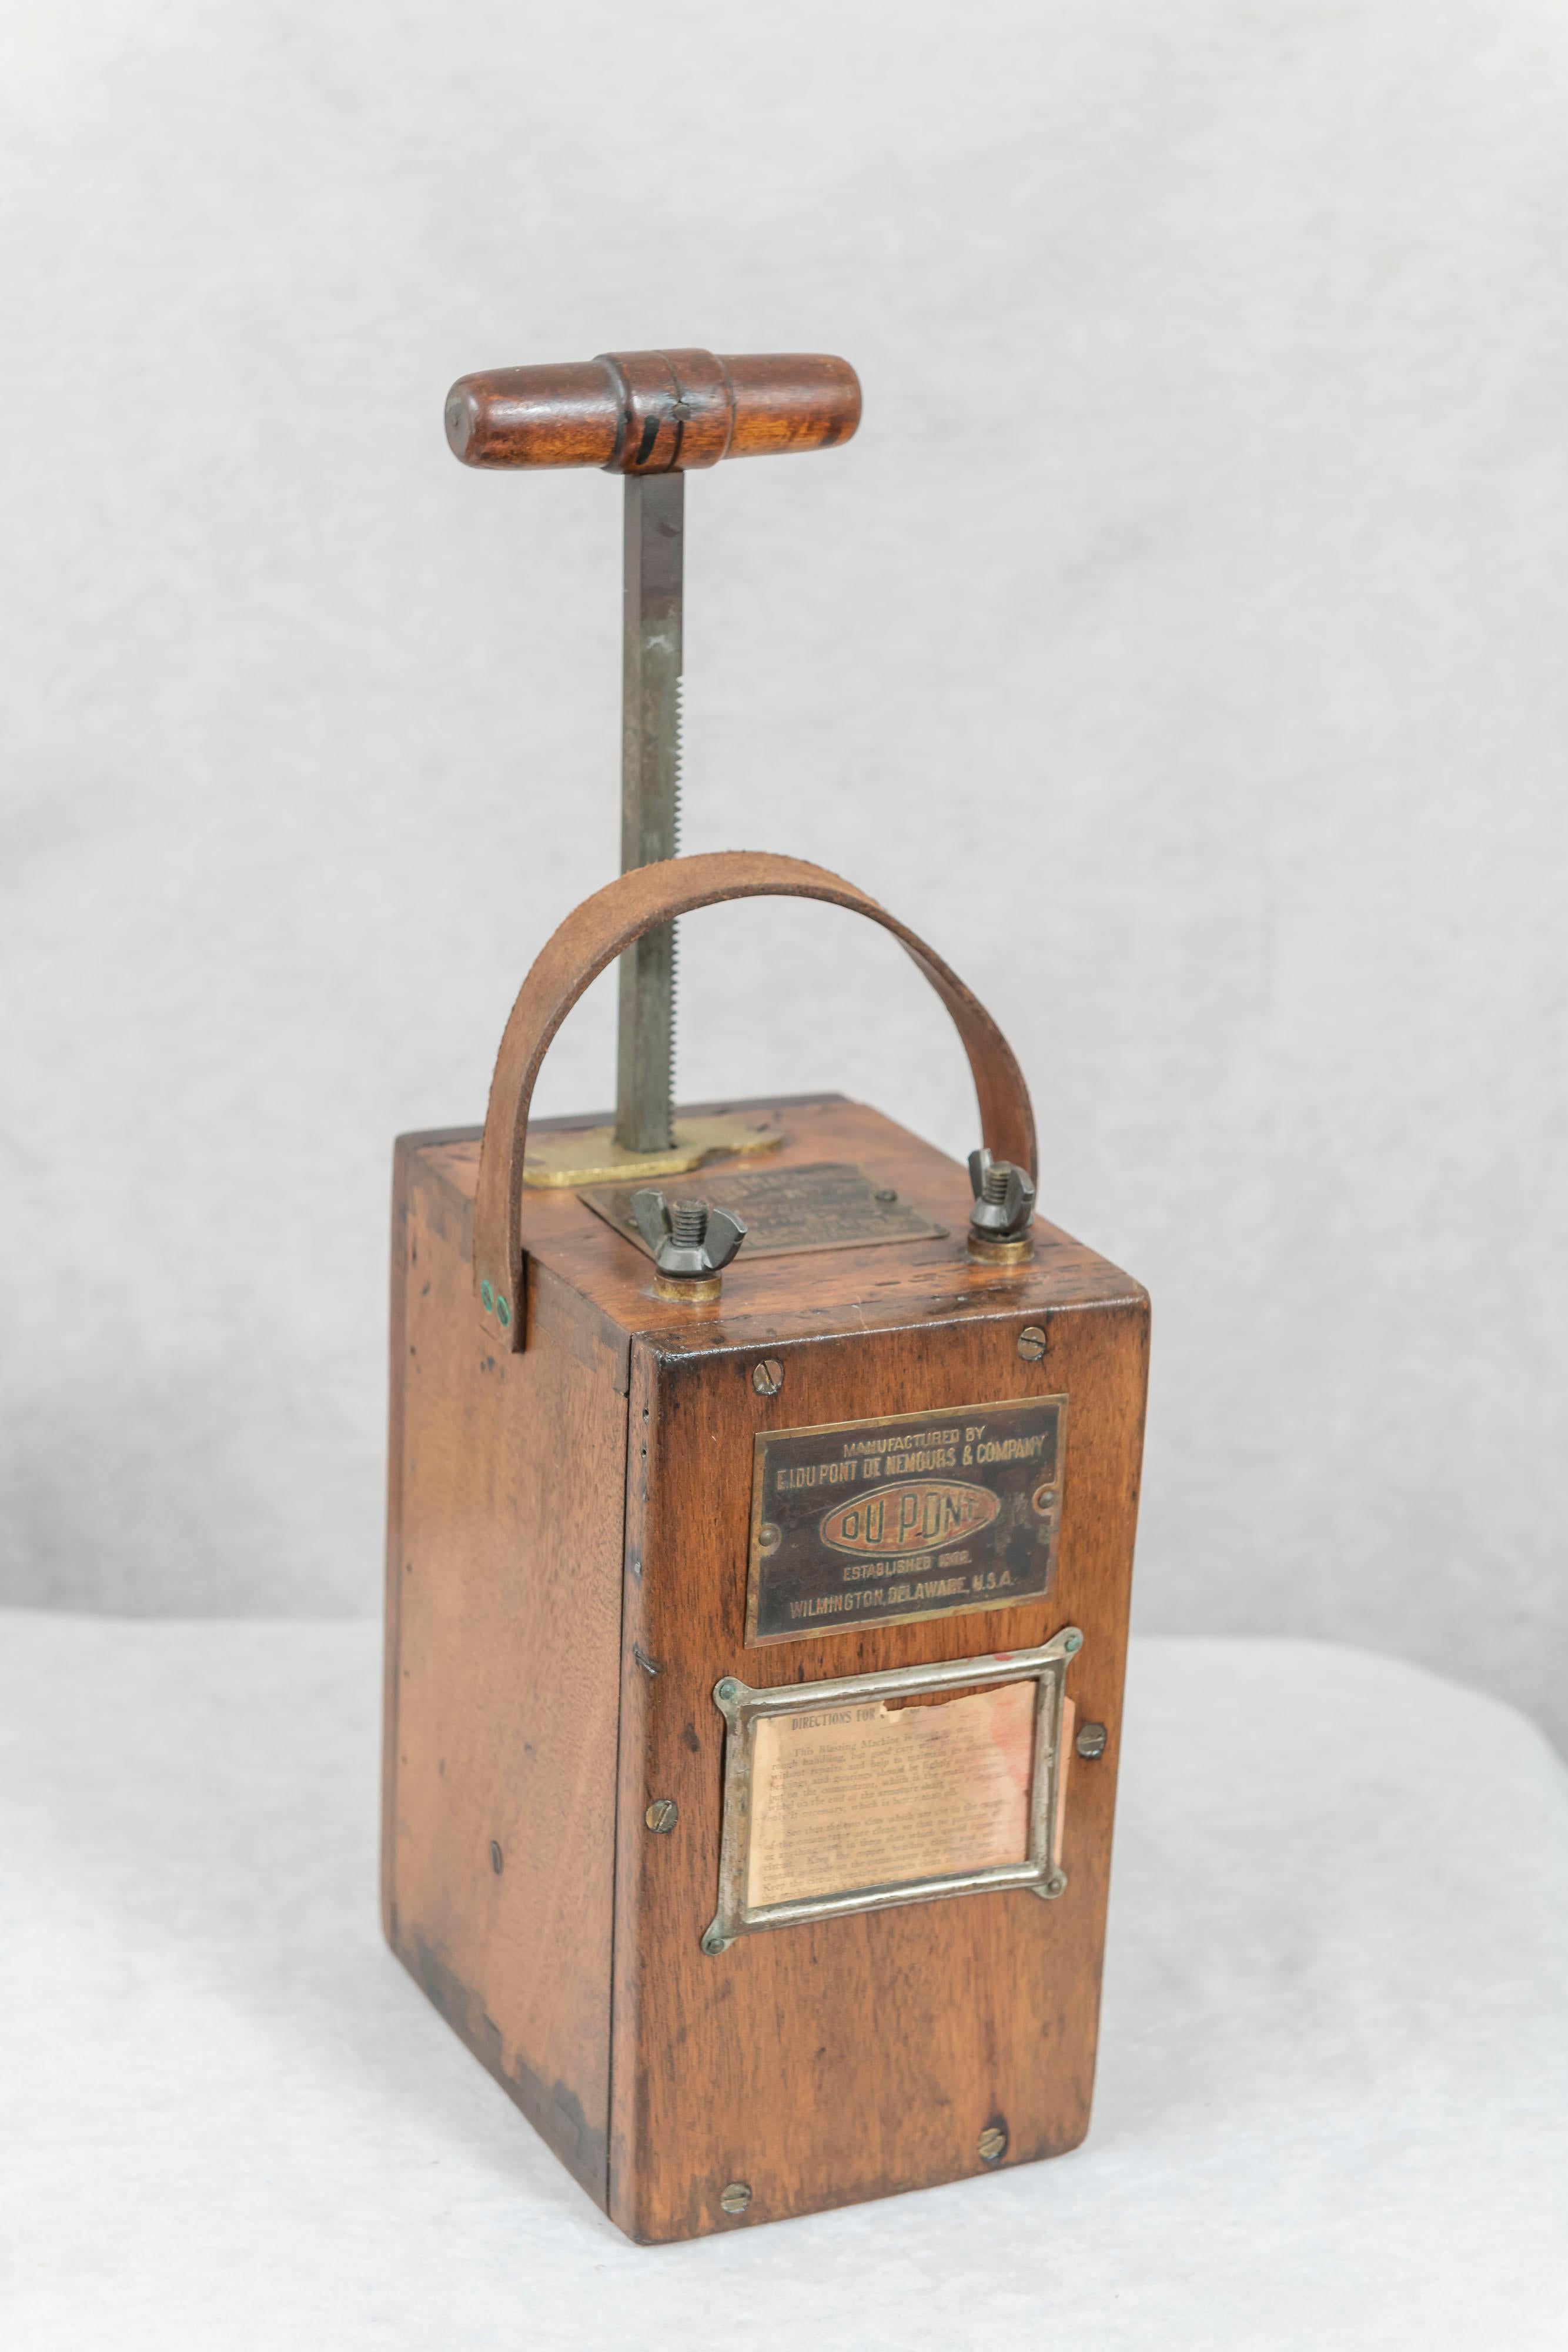 American Antique Dupont Blasting Machine, with Storage Tin for Caps